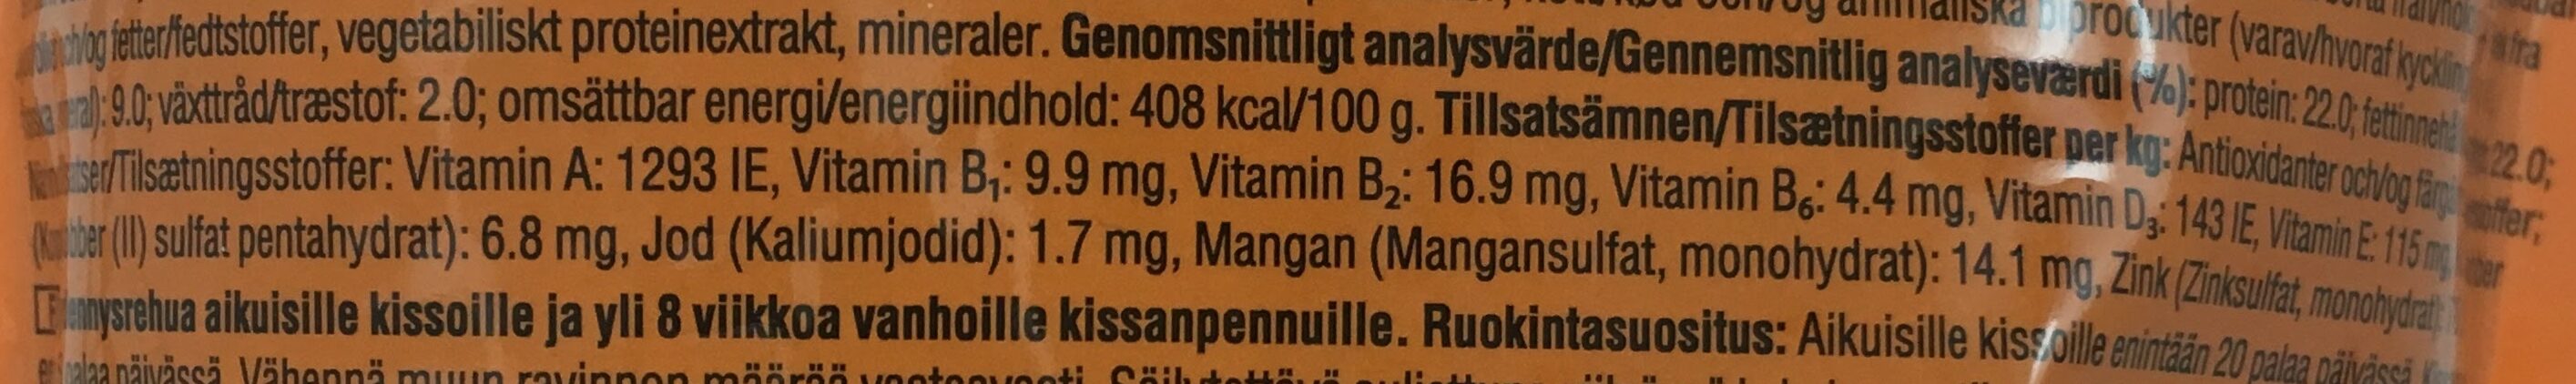 Dreamies med kylling - Nutrition facts - nb